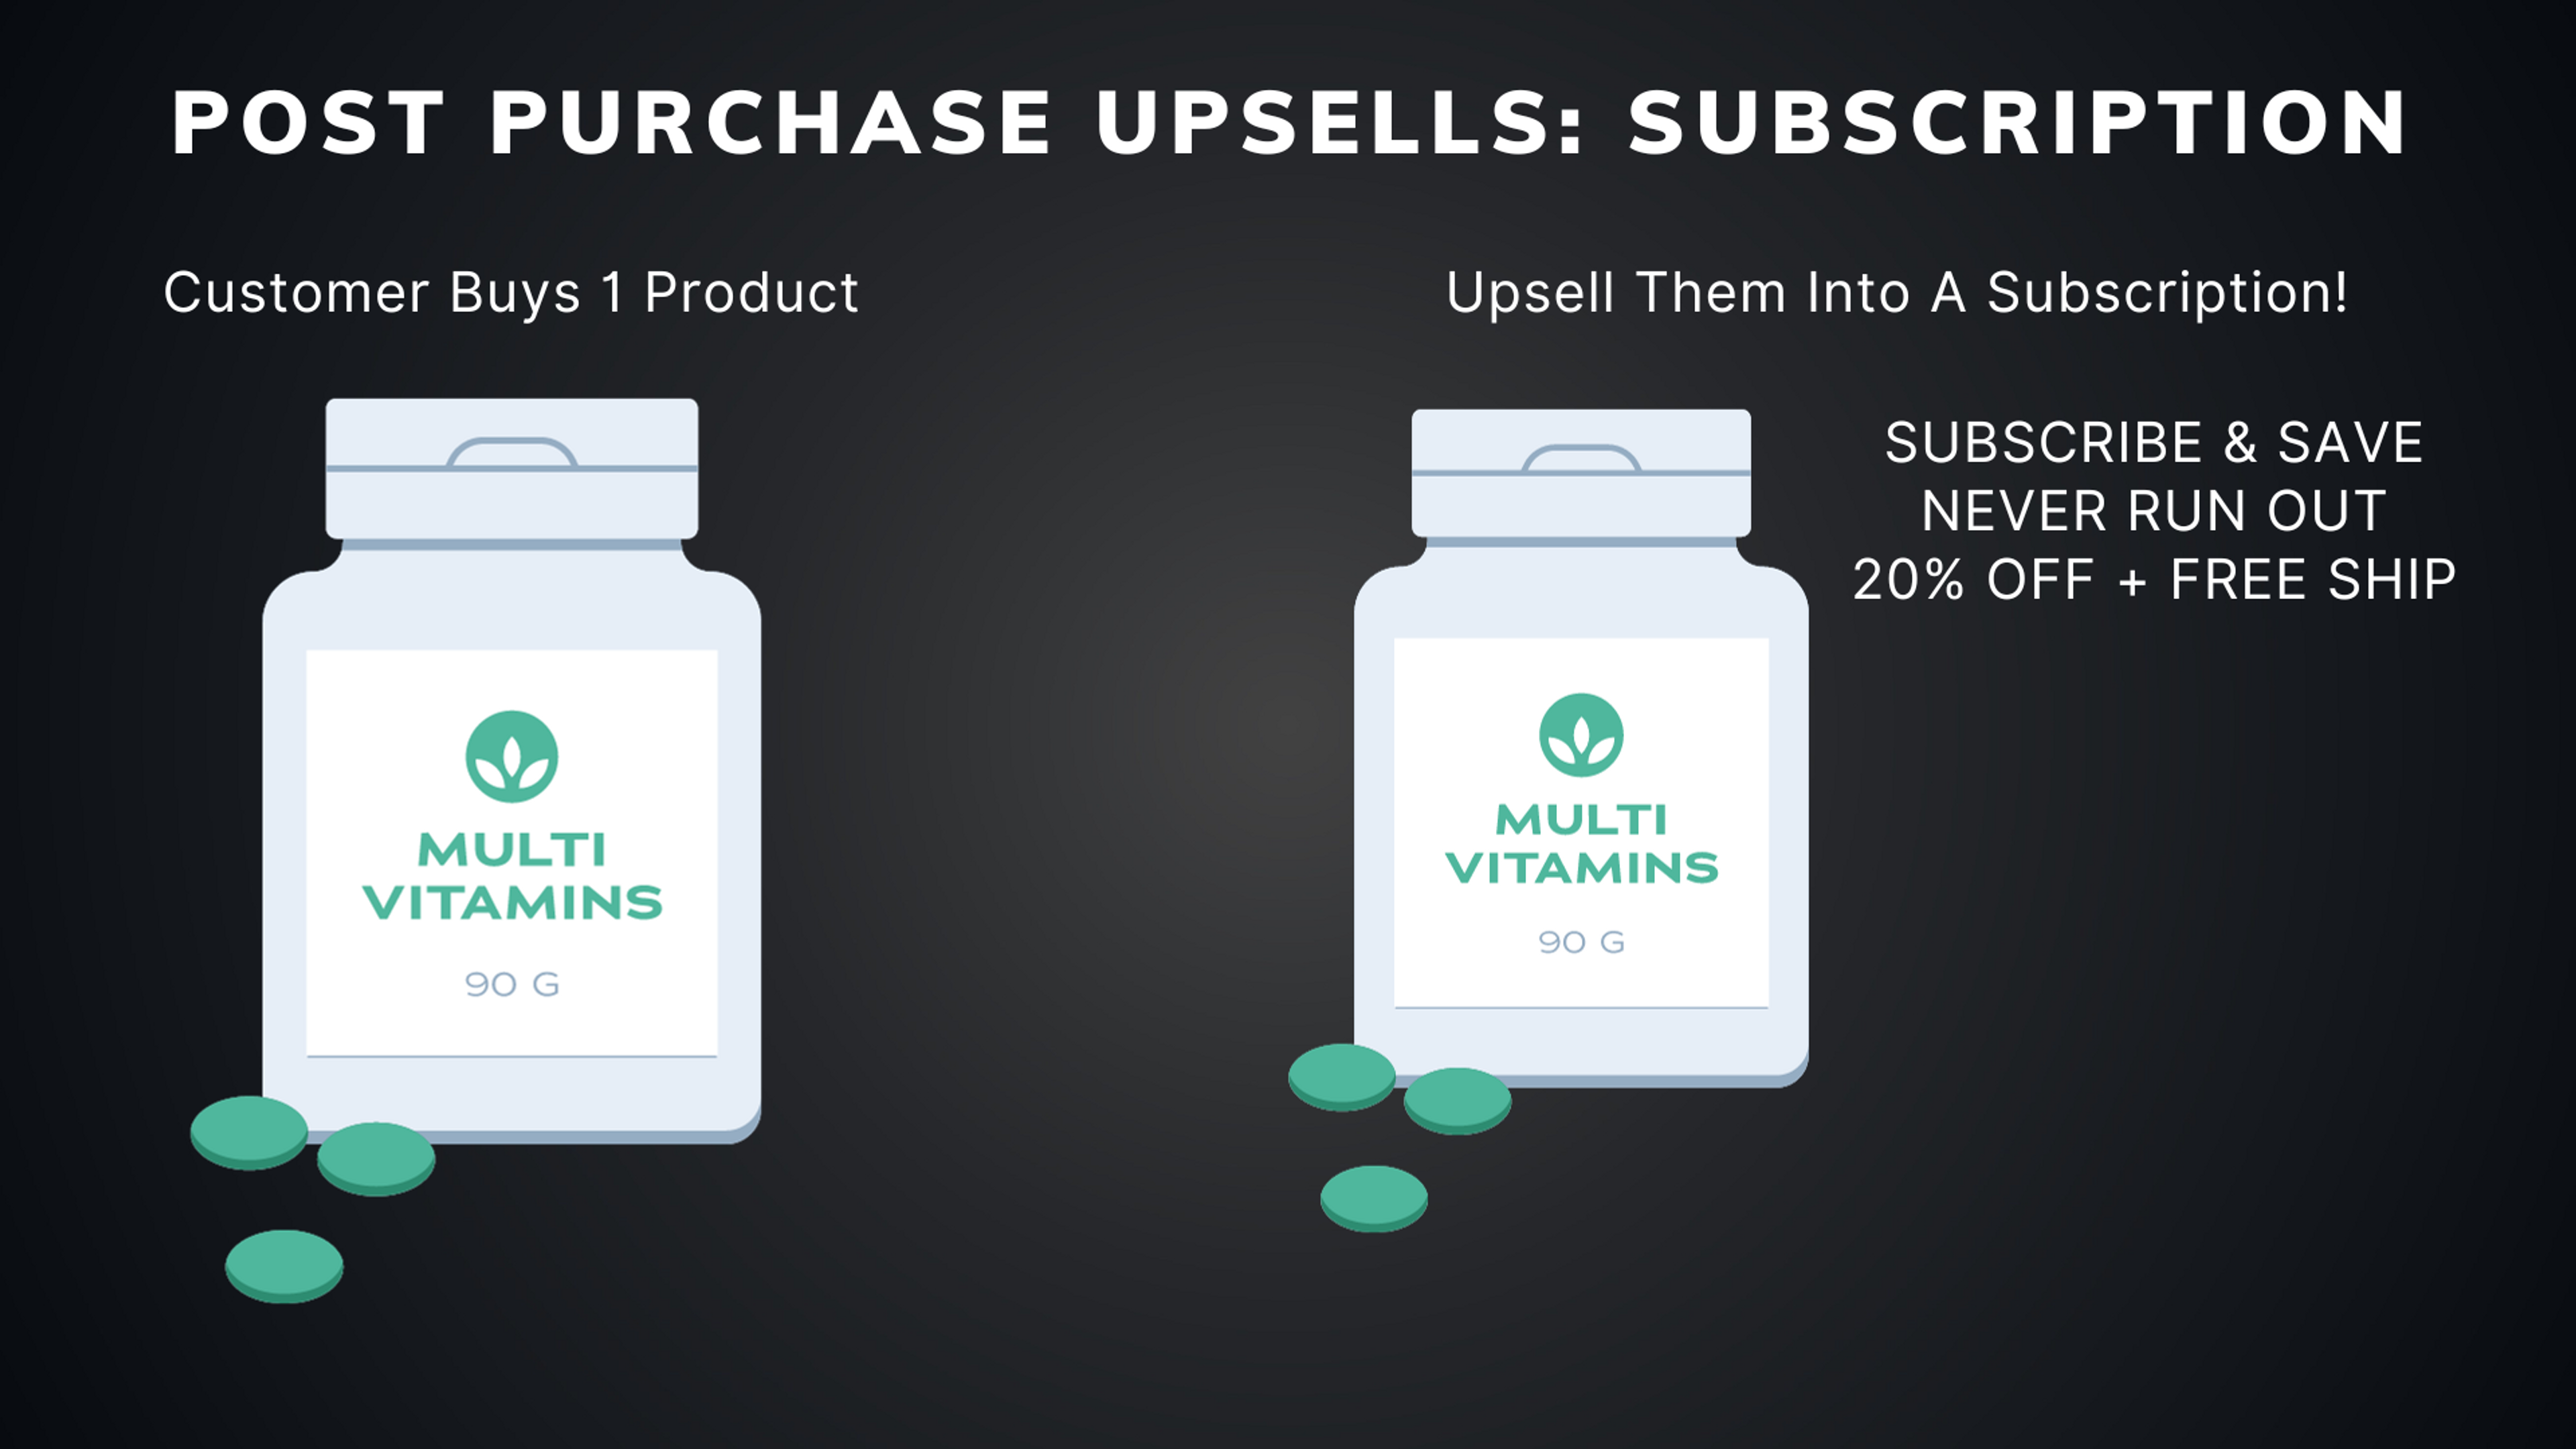 The Subscription Post Purchase Upsell Needs To Be A Better Deal Than Your Original Offer